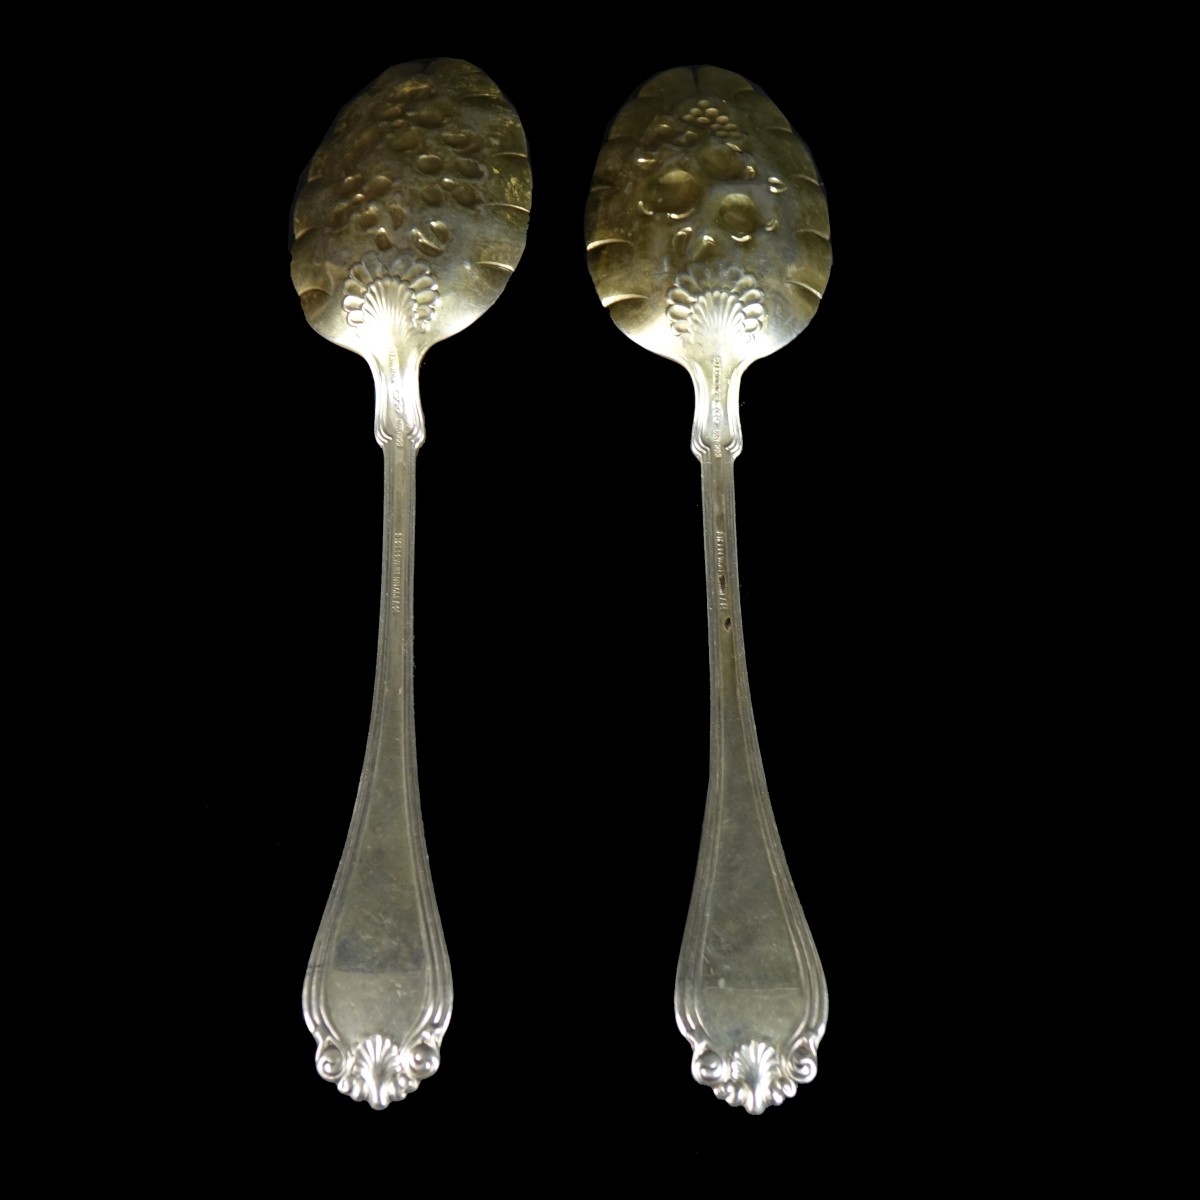 Pair of Dominick and Haff Sterling Spoons